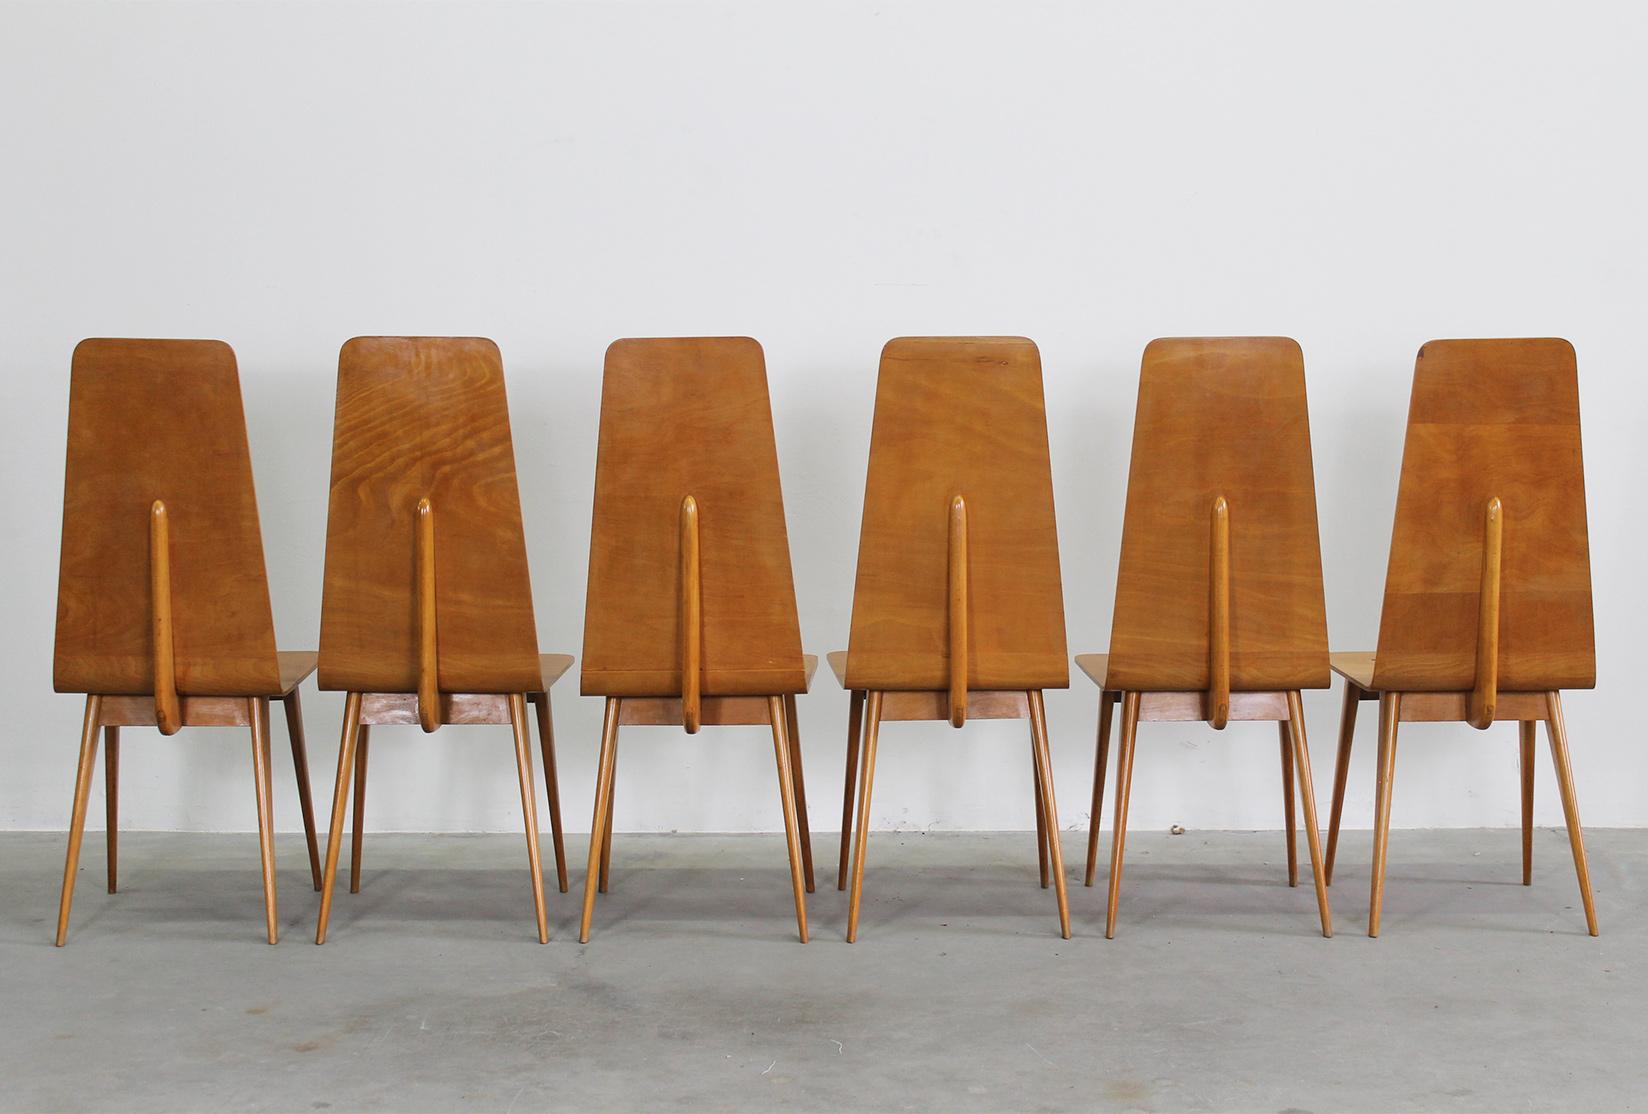 Set of Six Dining Chairs in Wood by Sineo Gemignani Italian Manufacture 1940s For Sale 1